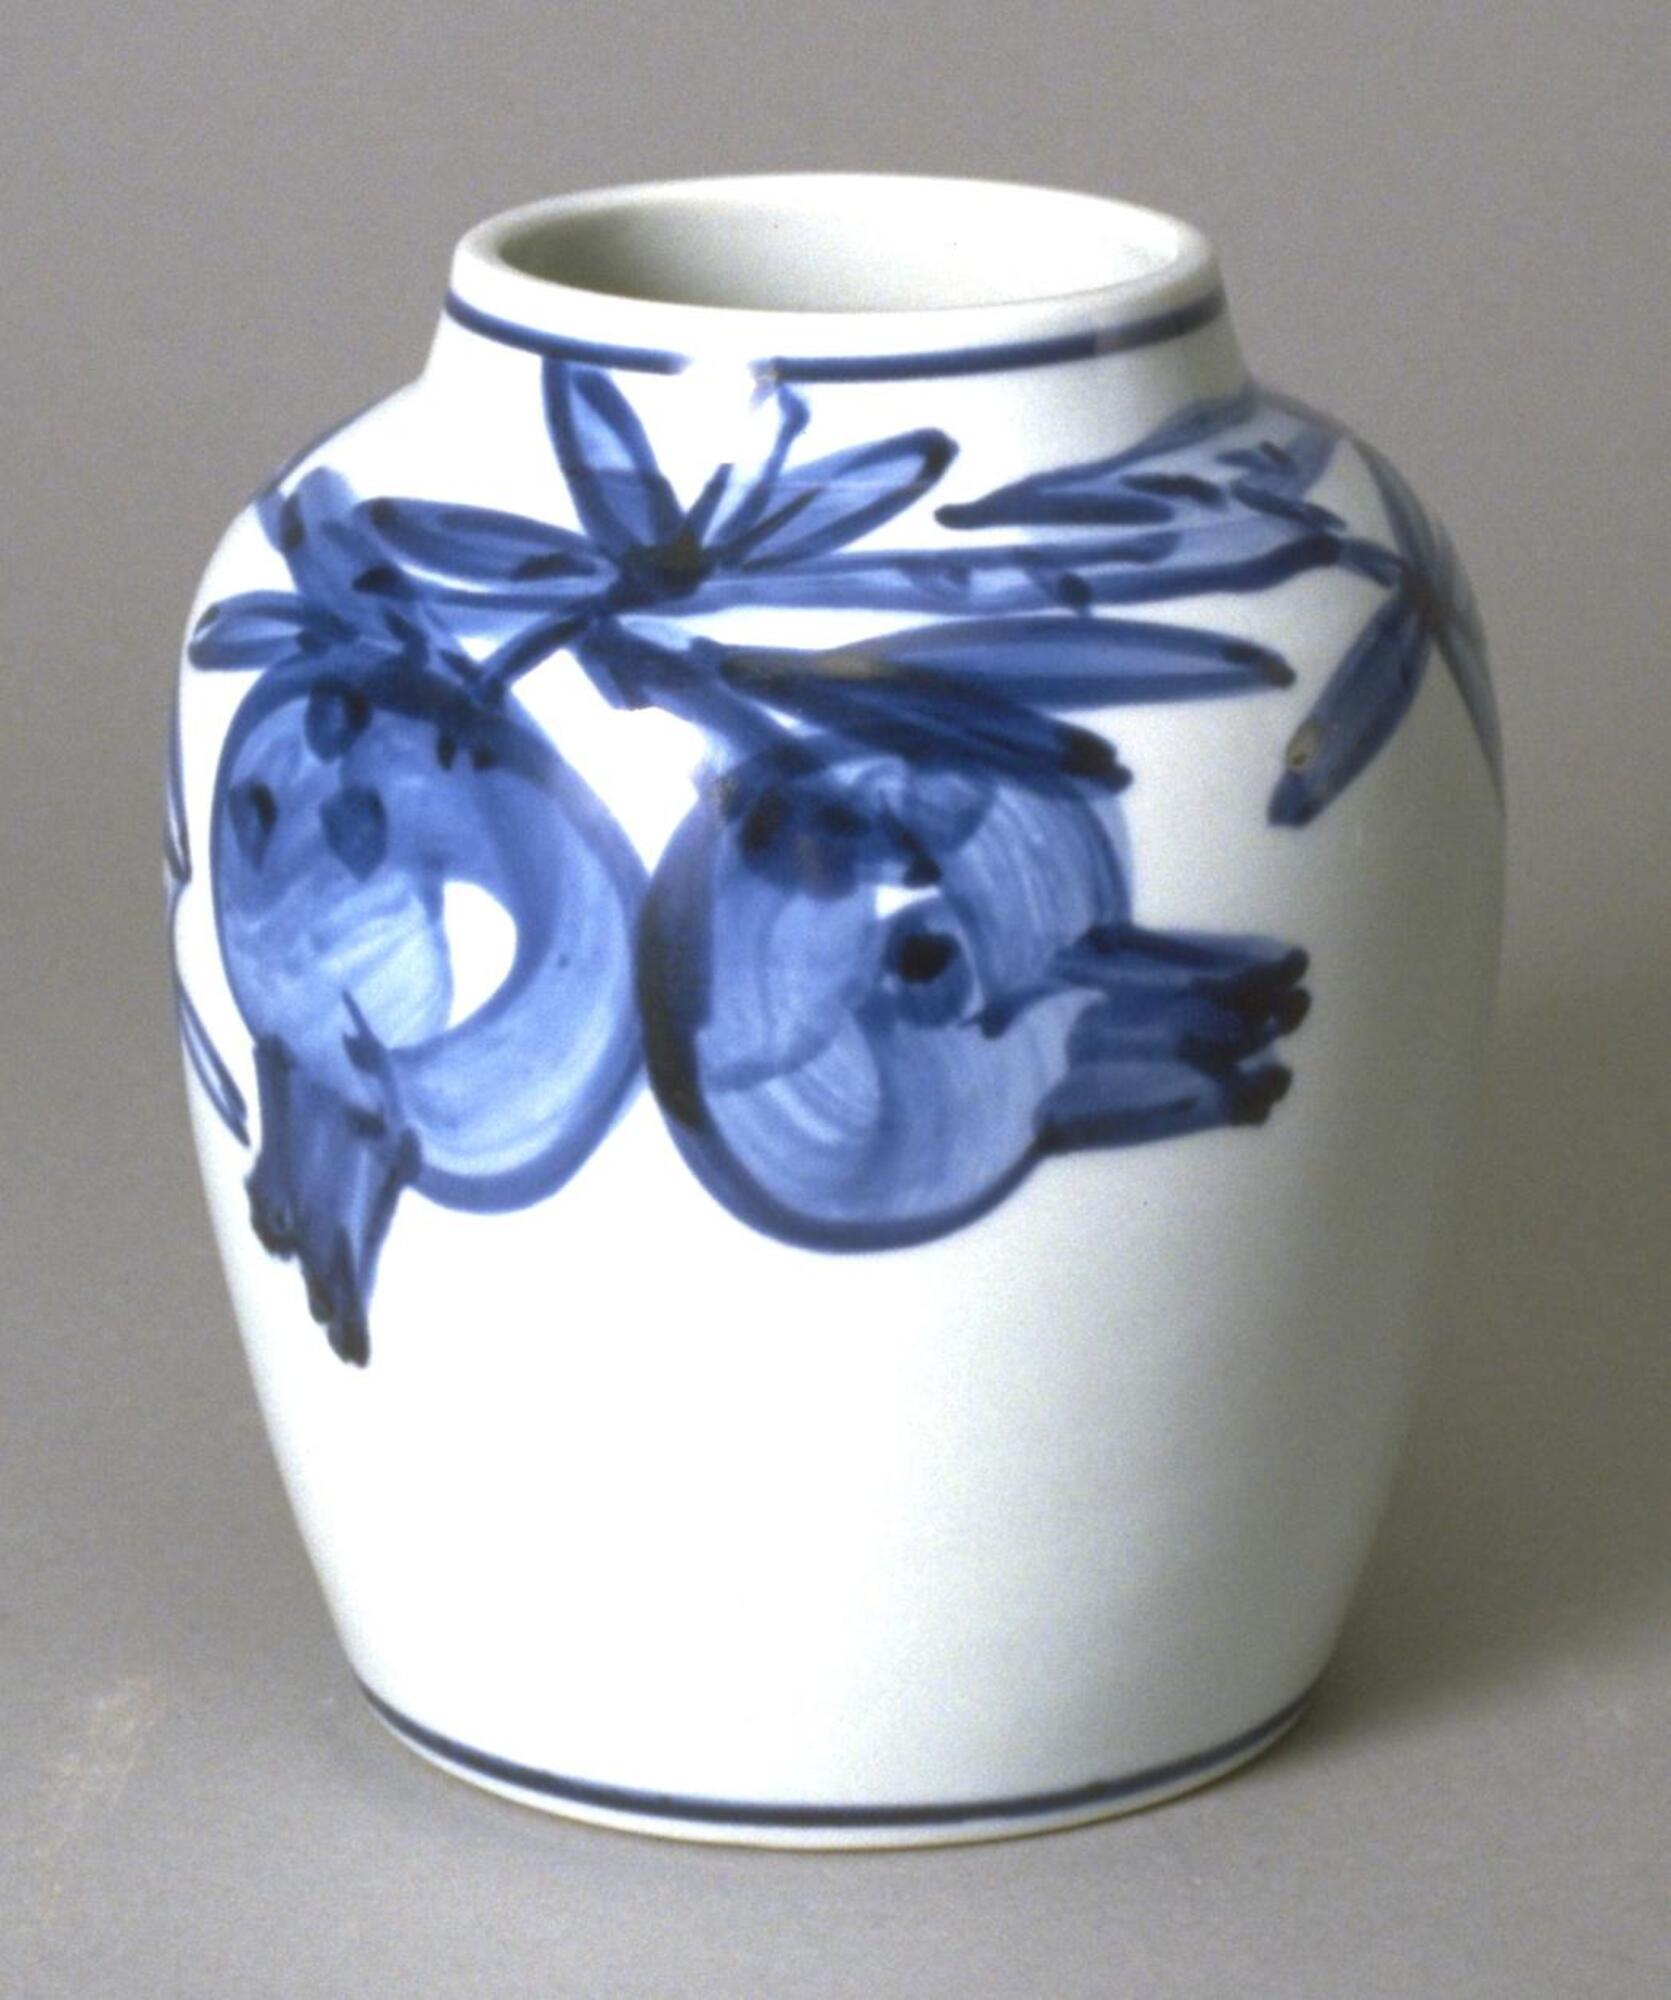 It is a medium size porcelain vase with pomegranate design in blue underglaze. The body is round with gentle shoulders; the mouth is wide and the neck is short and slightly inward. It has no foot. The pomegranate fruit and leaves are quickly executed with broad brush around the shoulder and the middle of the body. There is a band of a single line around the mouth and another around near the bottom. There is the artist’s signature “yû” on the eye. There is no foot but unglazed ring around the bottom; the eye is glazed.